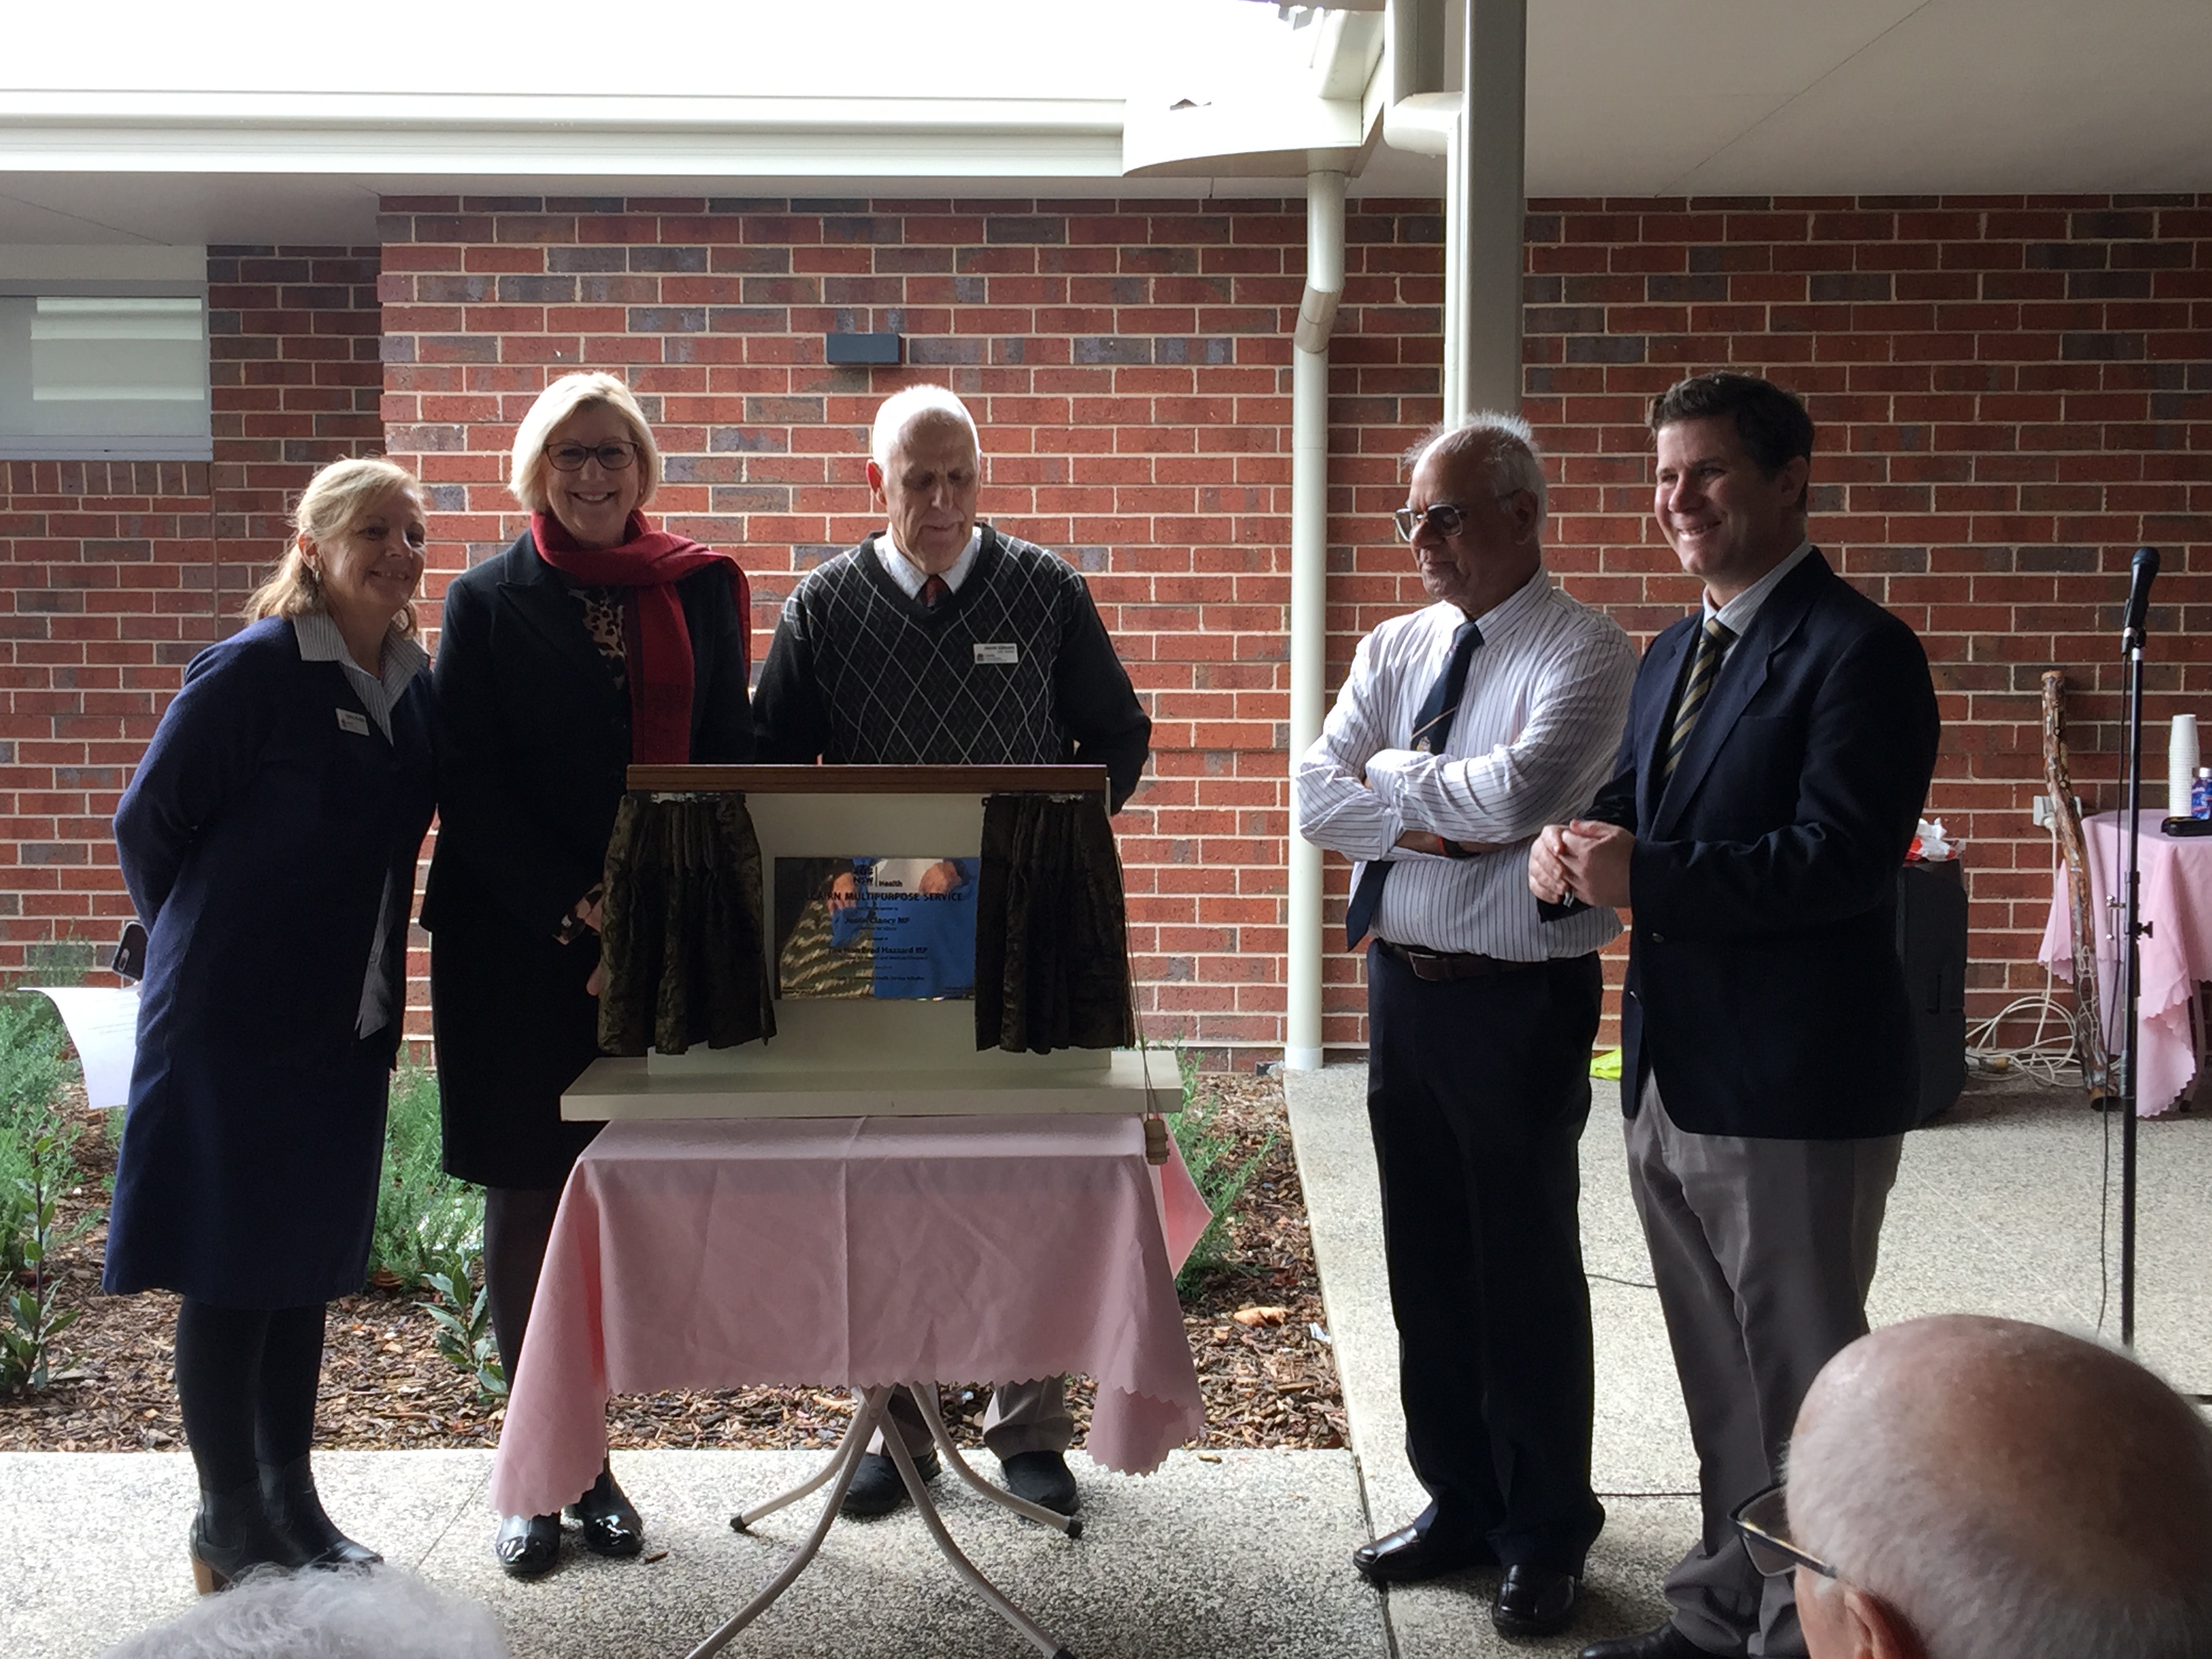 Culcairn MPS Officially Opened